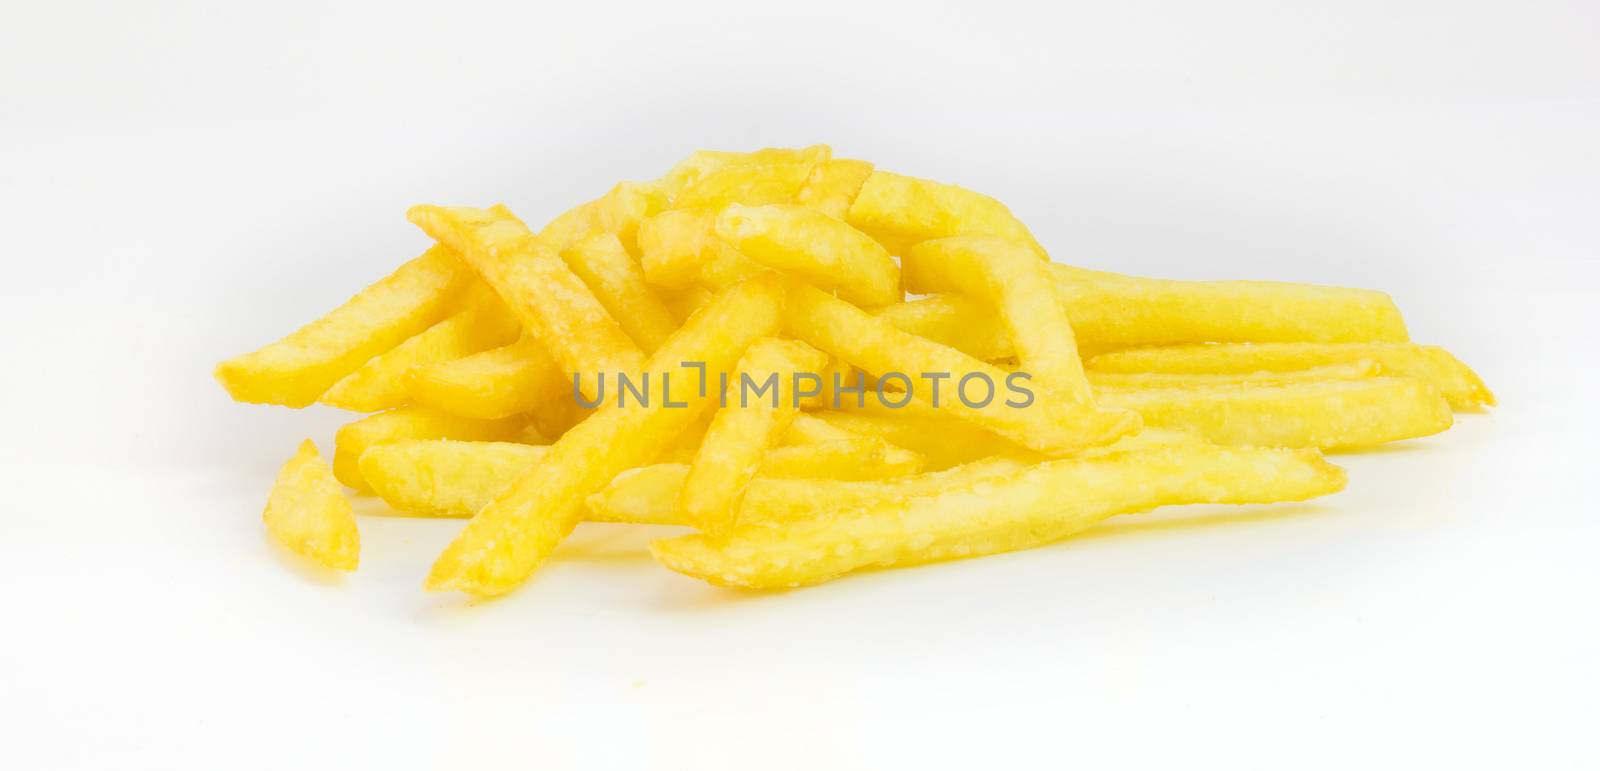 popular fast food french fries isolated on white background by chingraph